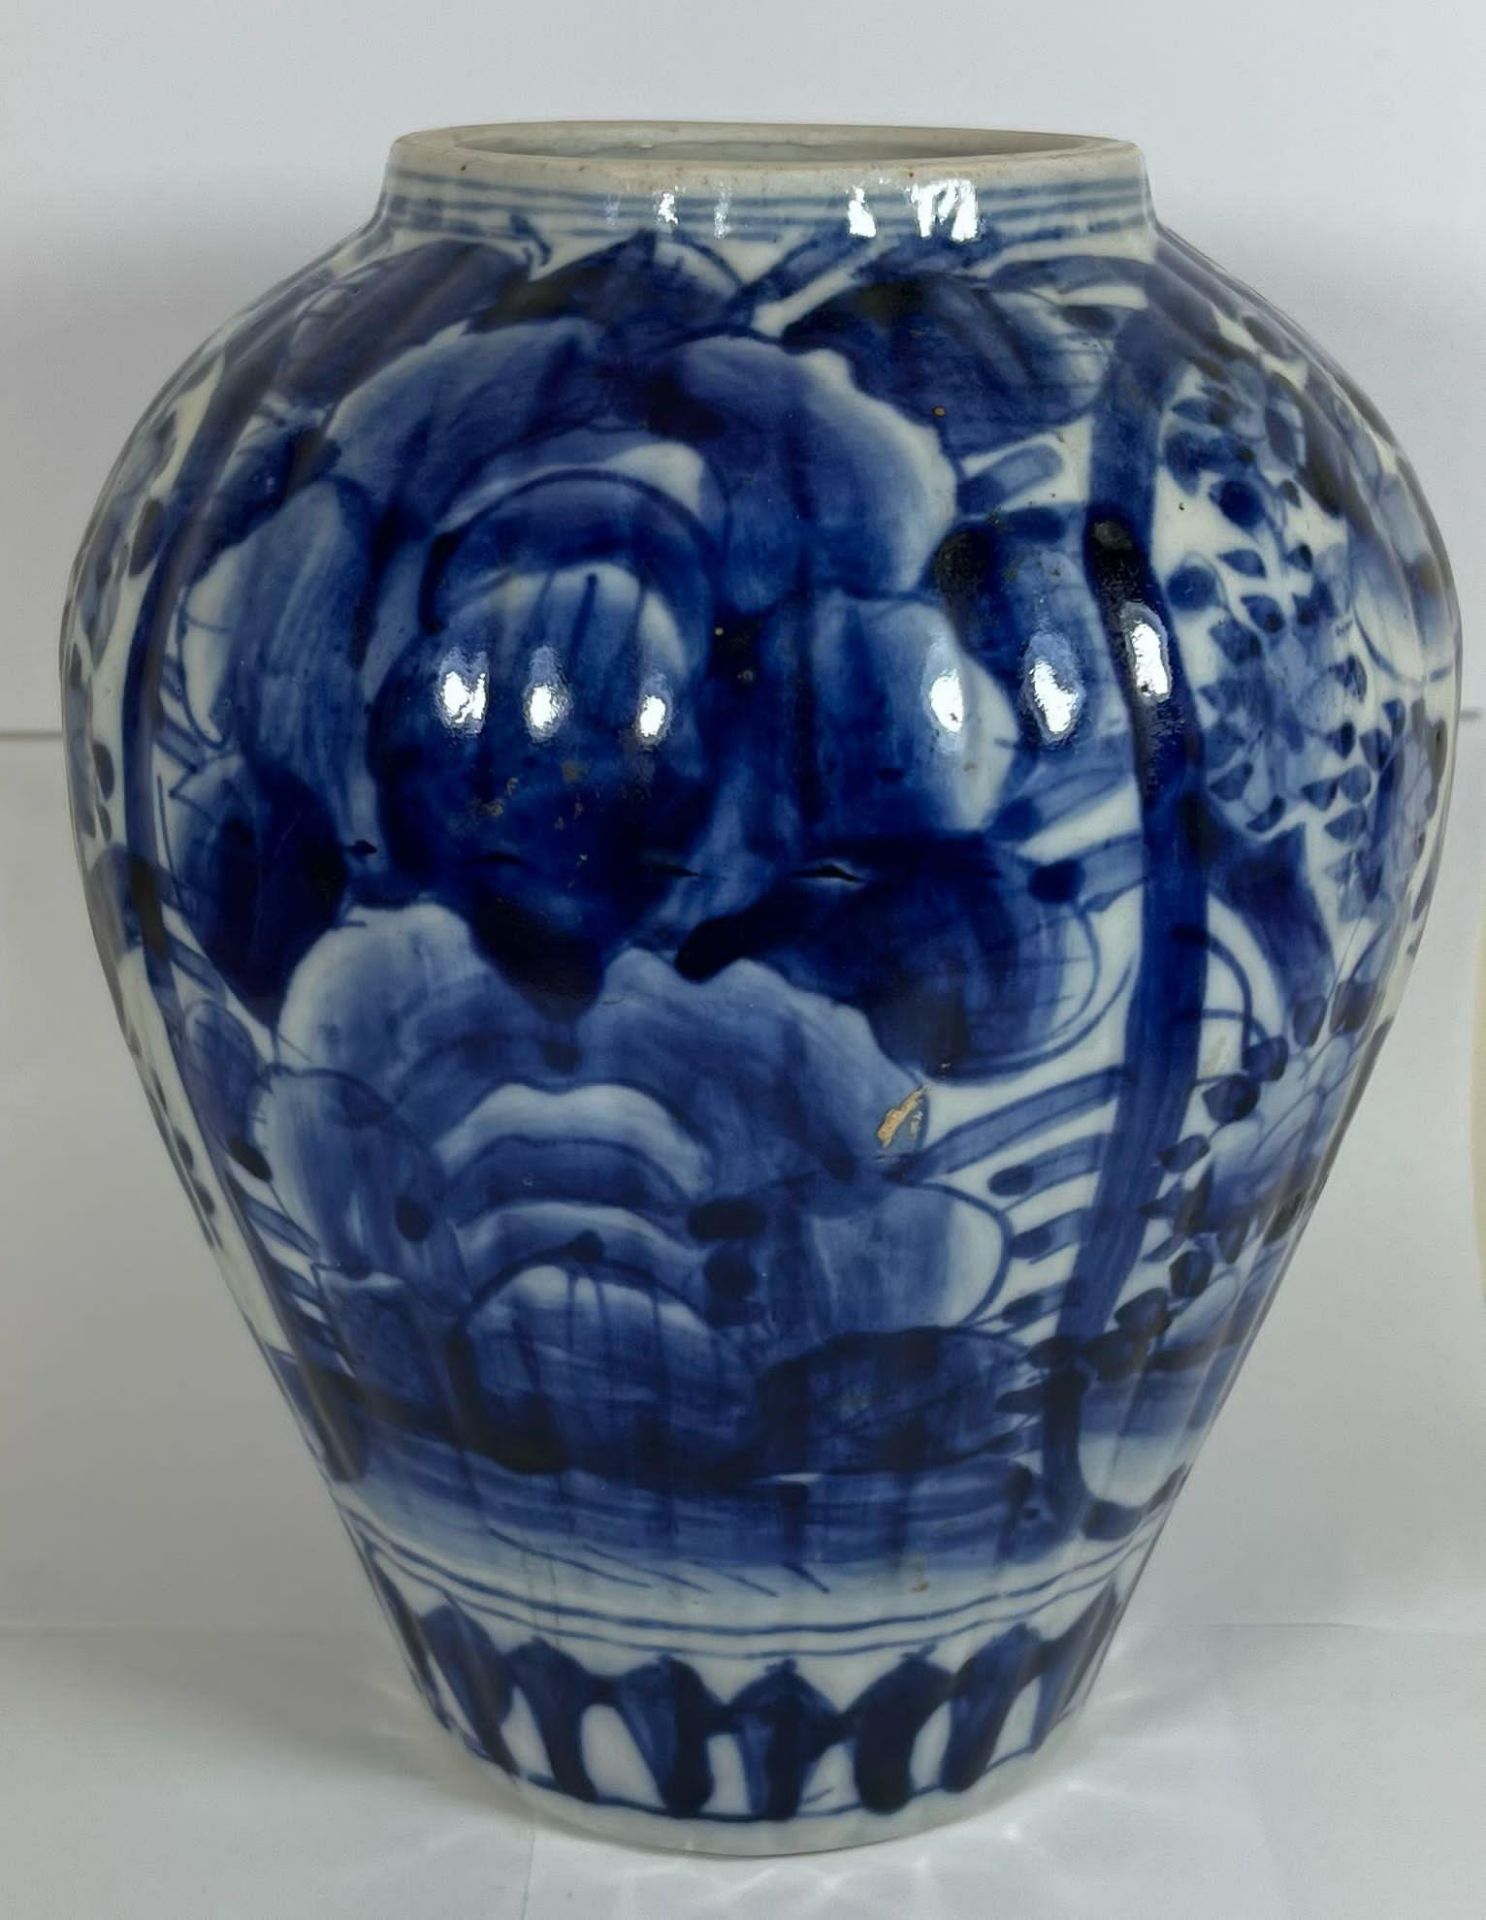 A JAPANESE MEIJI PERIOD (1868-1912) BLUE AND WHITE LIDDED TEMPLE JAR (FINIAL A/F), HEIGHT 30CM - Image 4 of 7